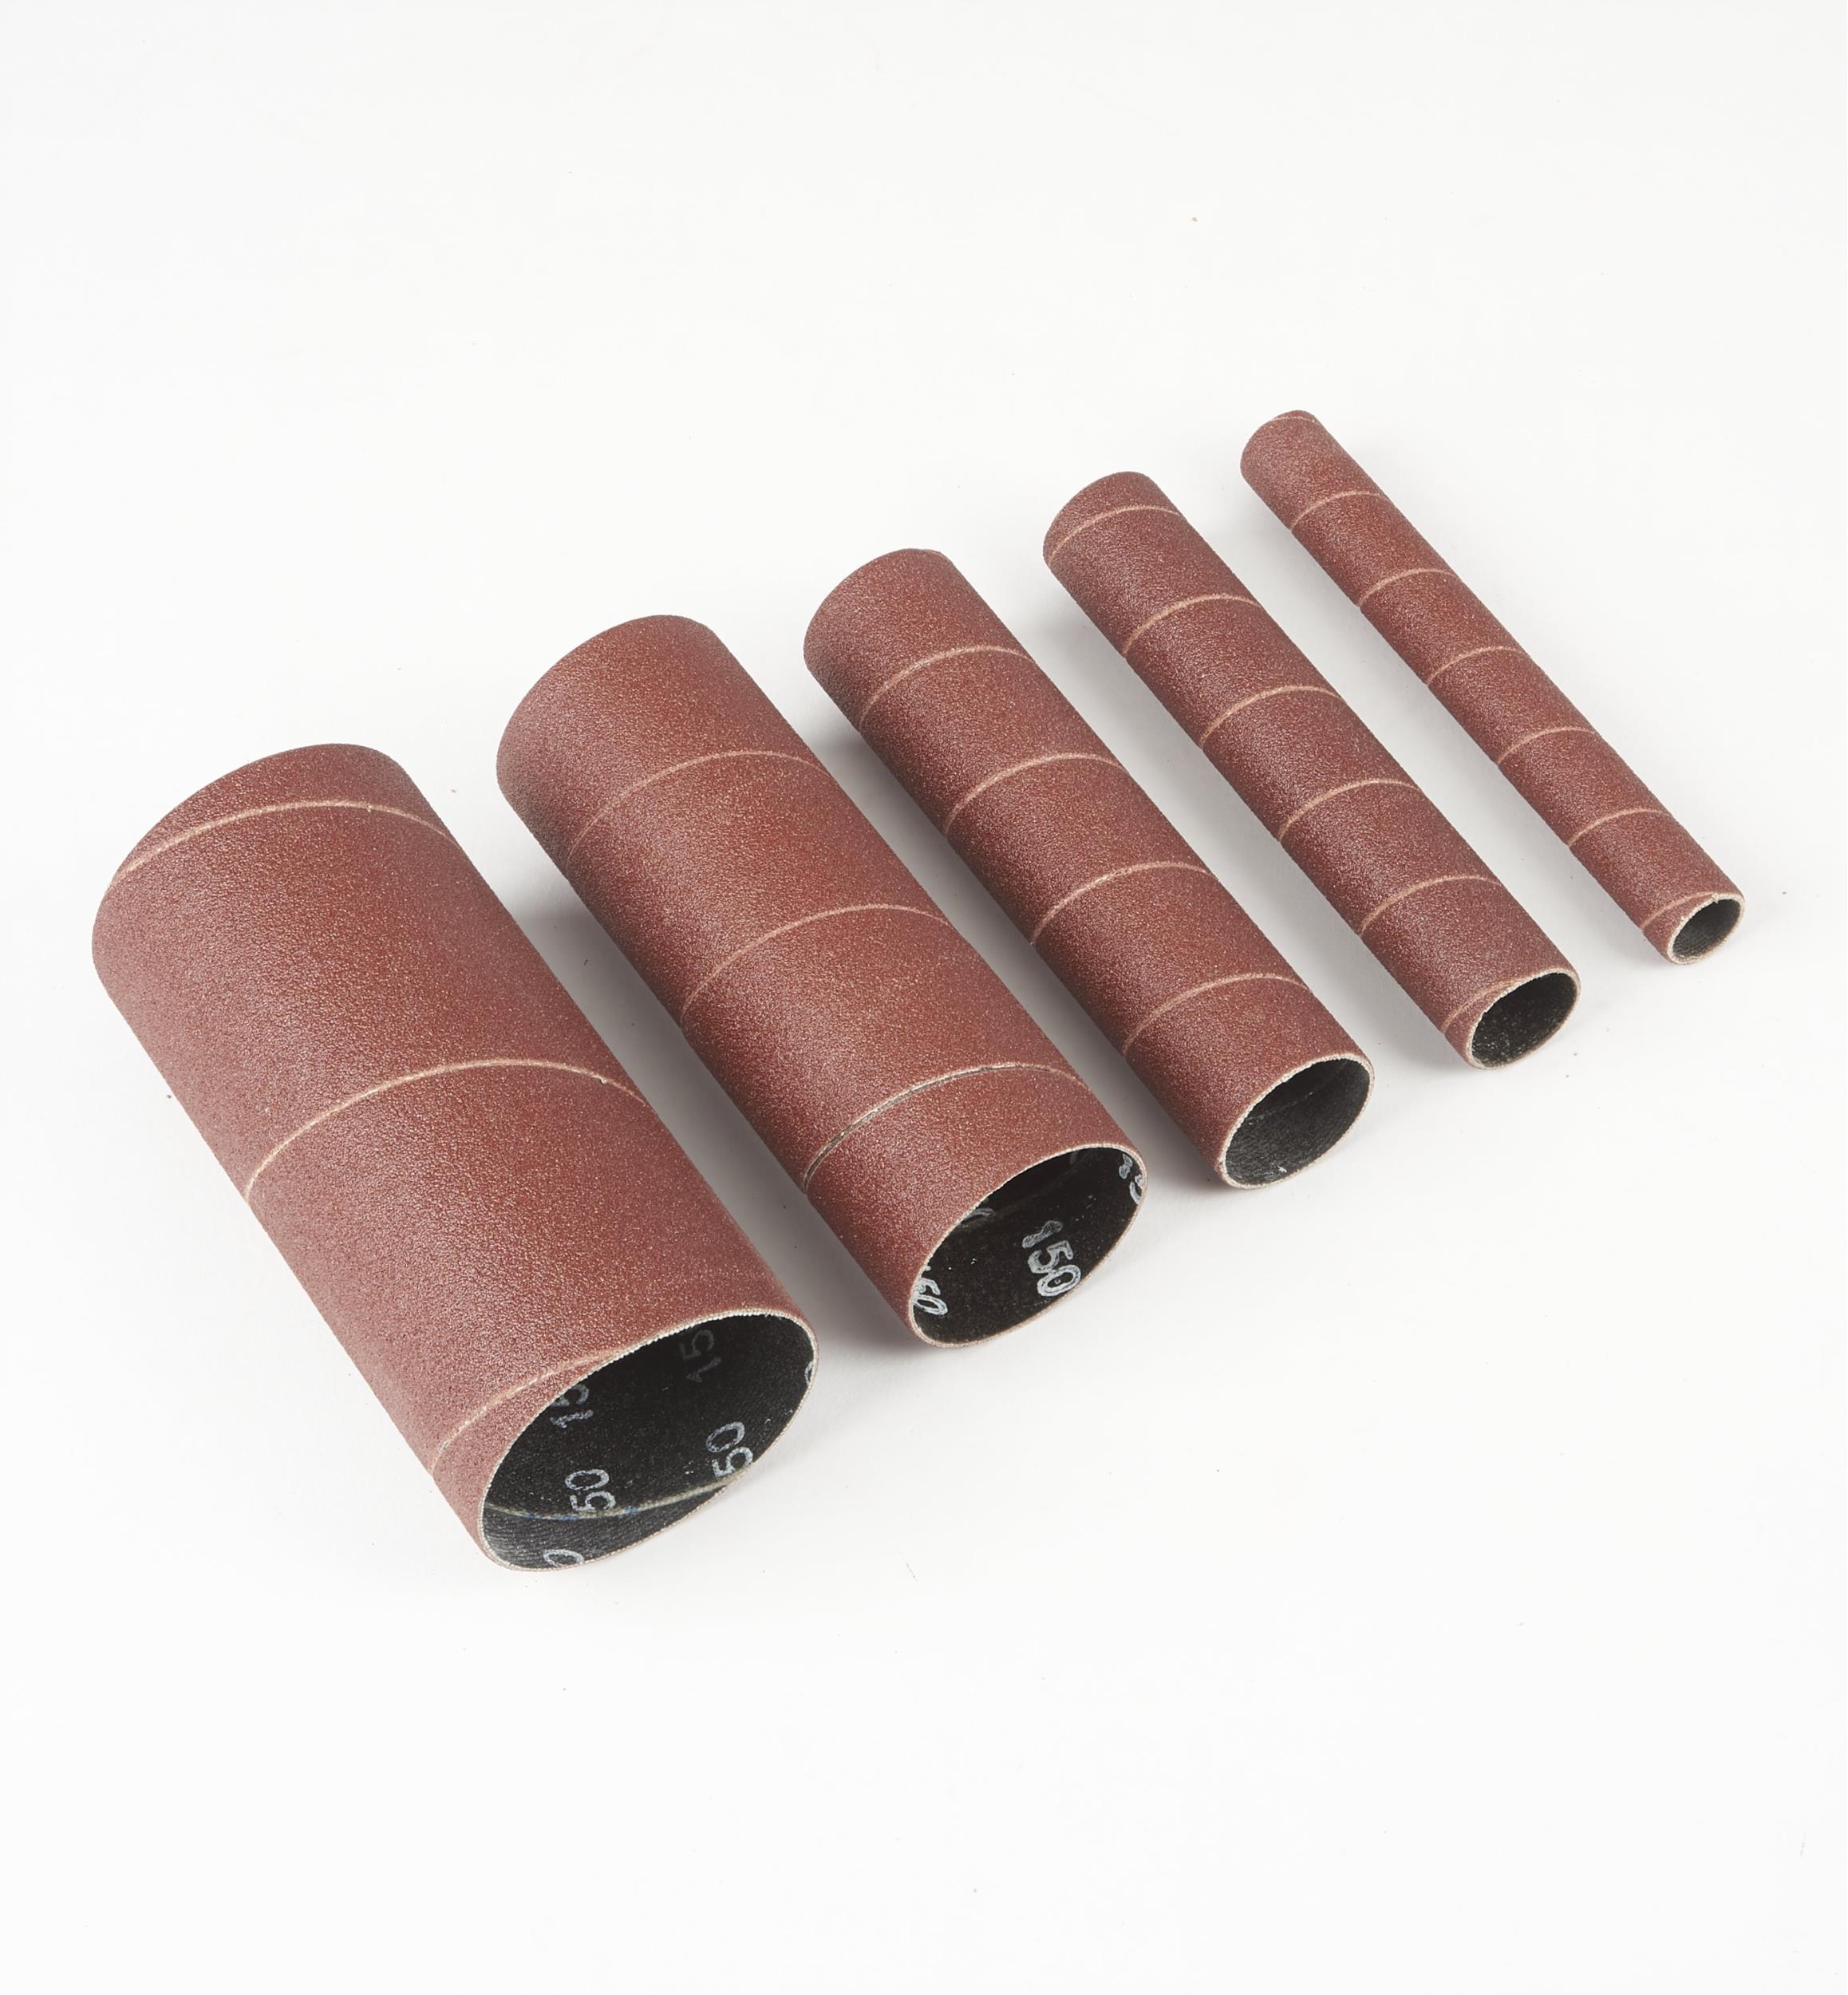 50 Pieces 80 Grit 15mm Sanding Band Drum Sleeve 3mm Shank